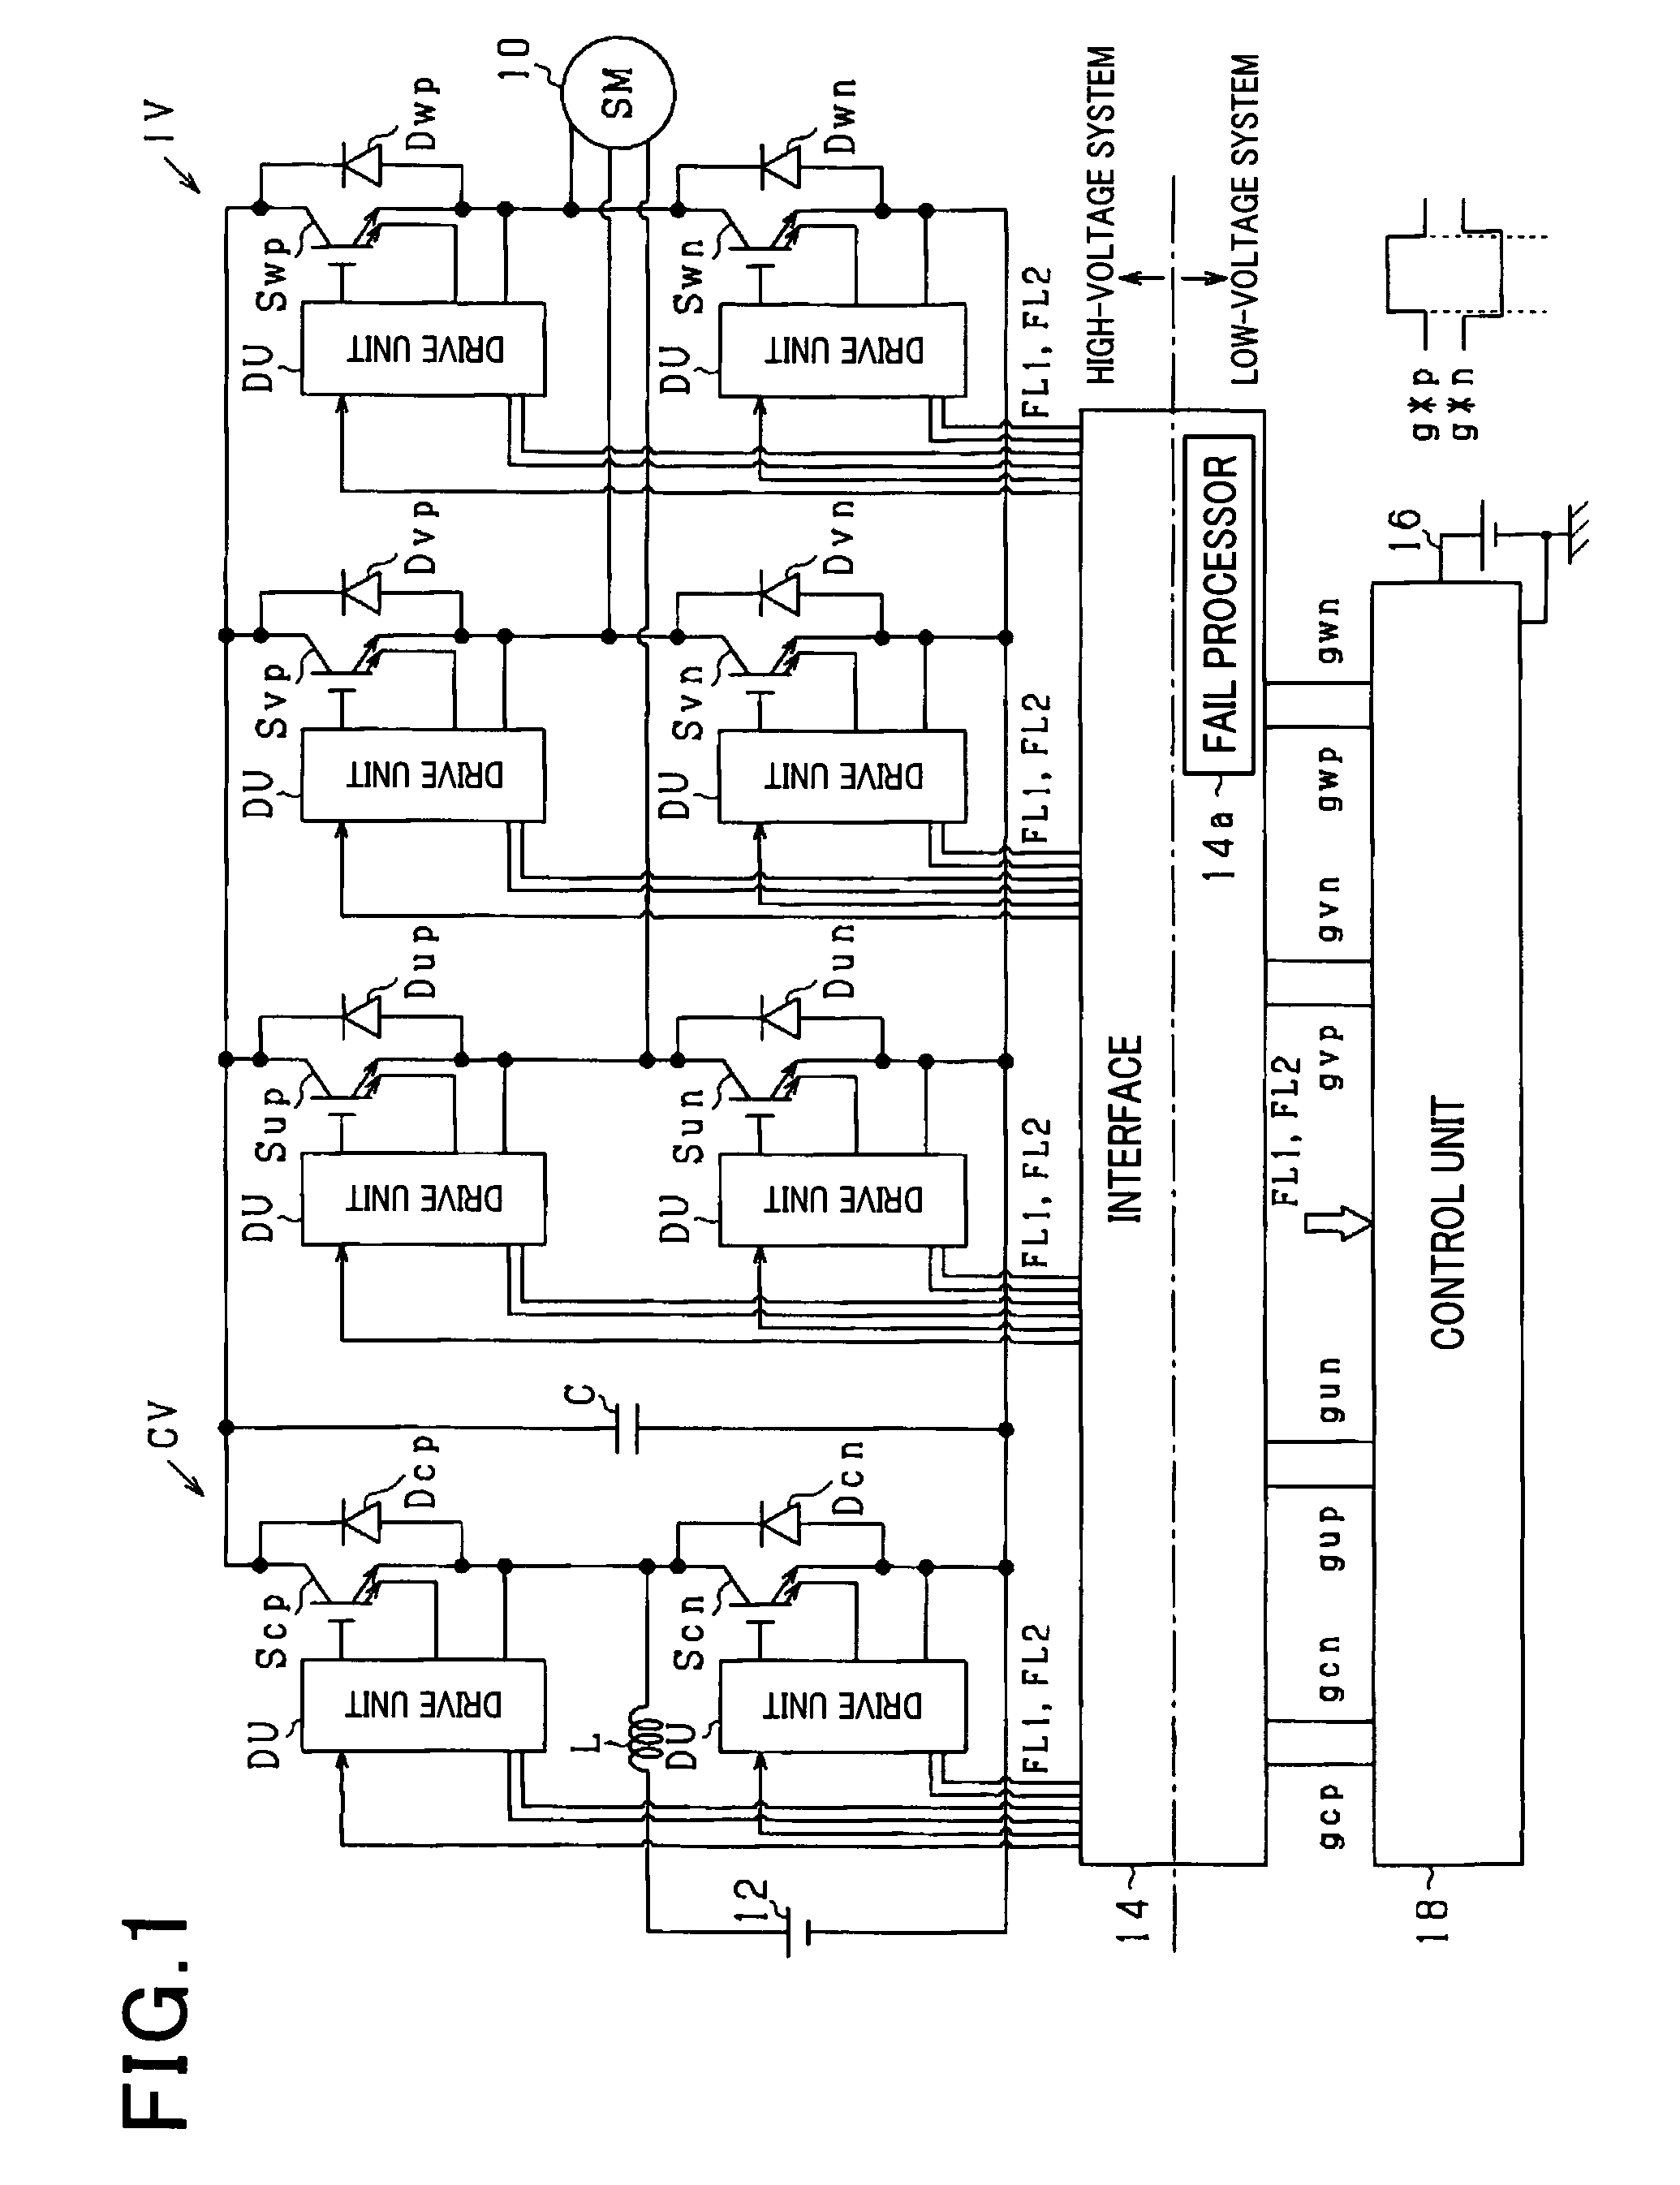 Apparatus for driving voltage controlled switching elements